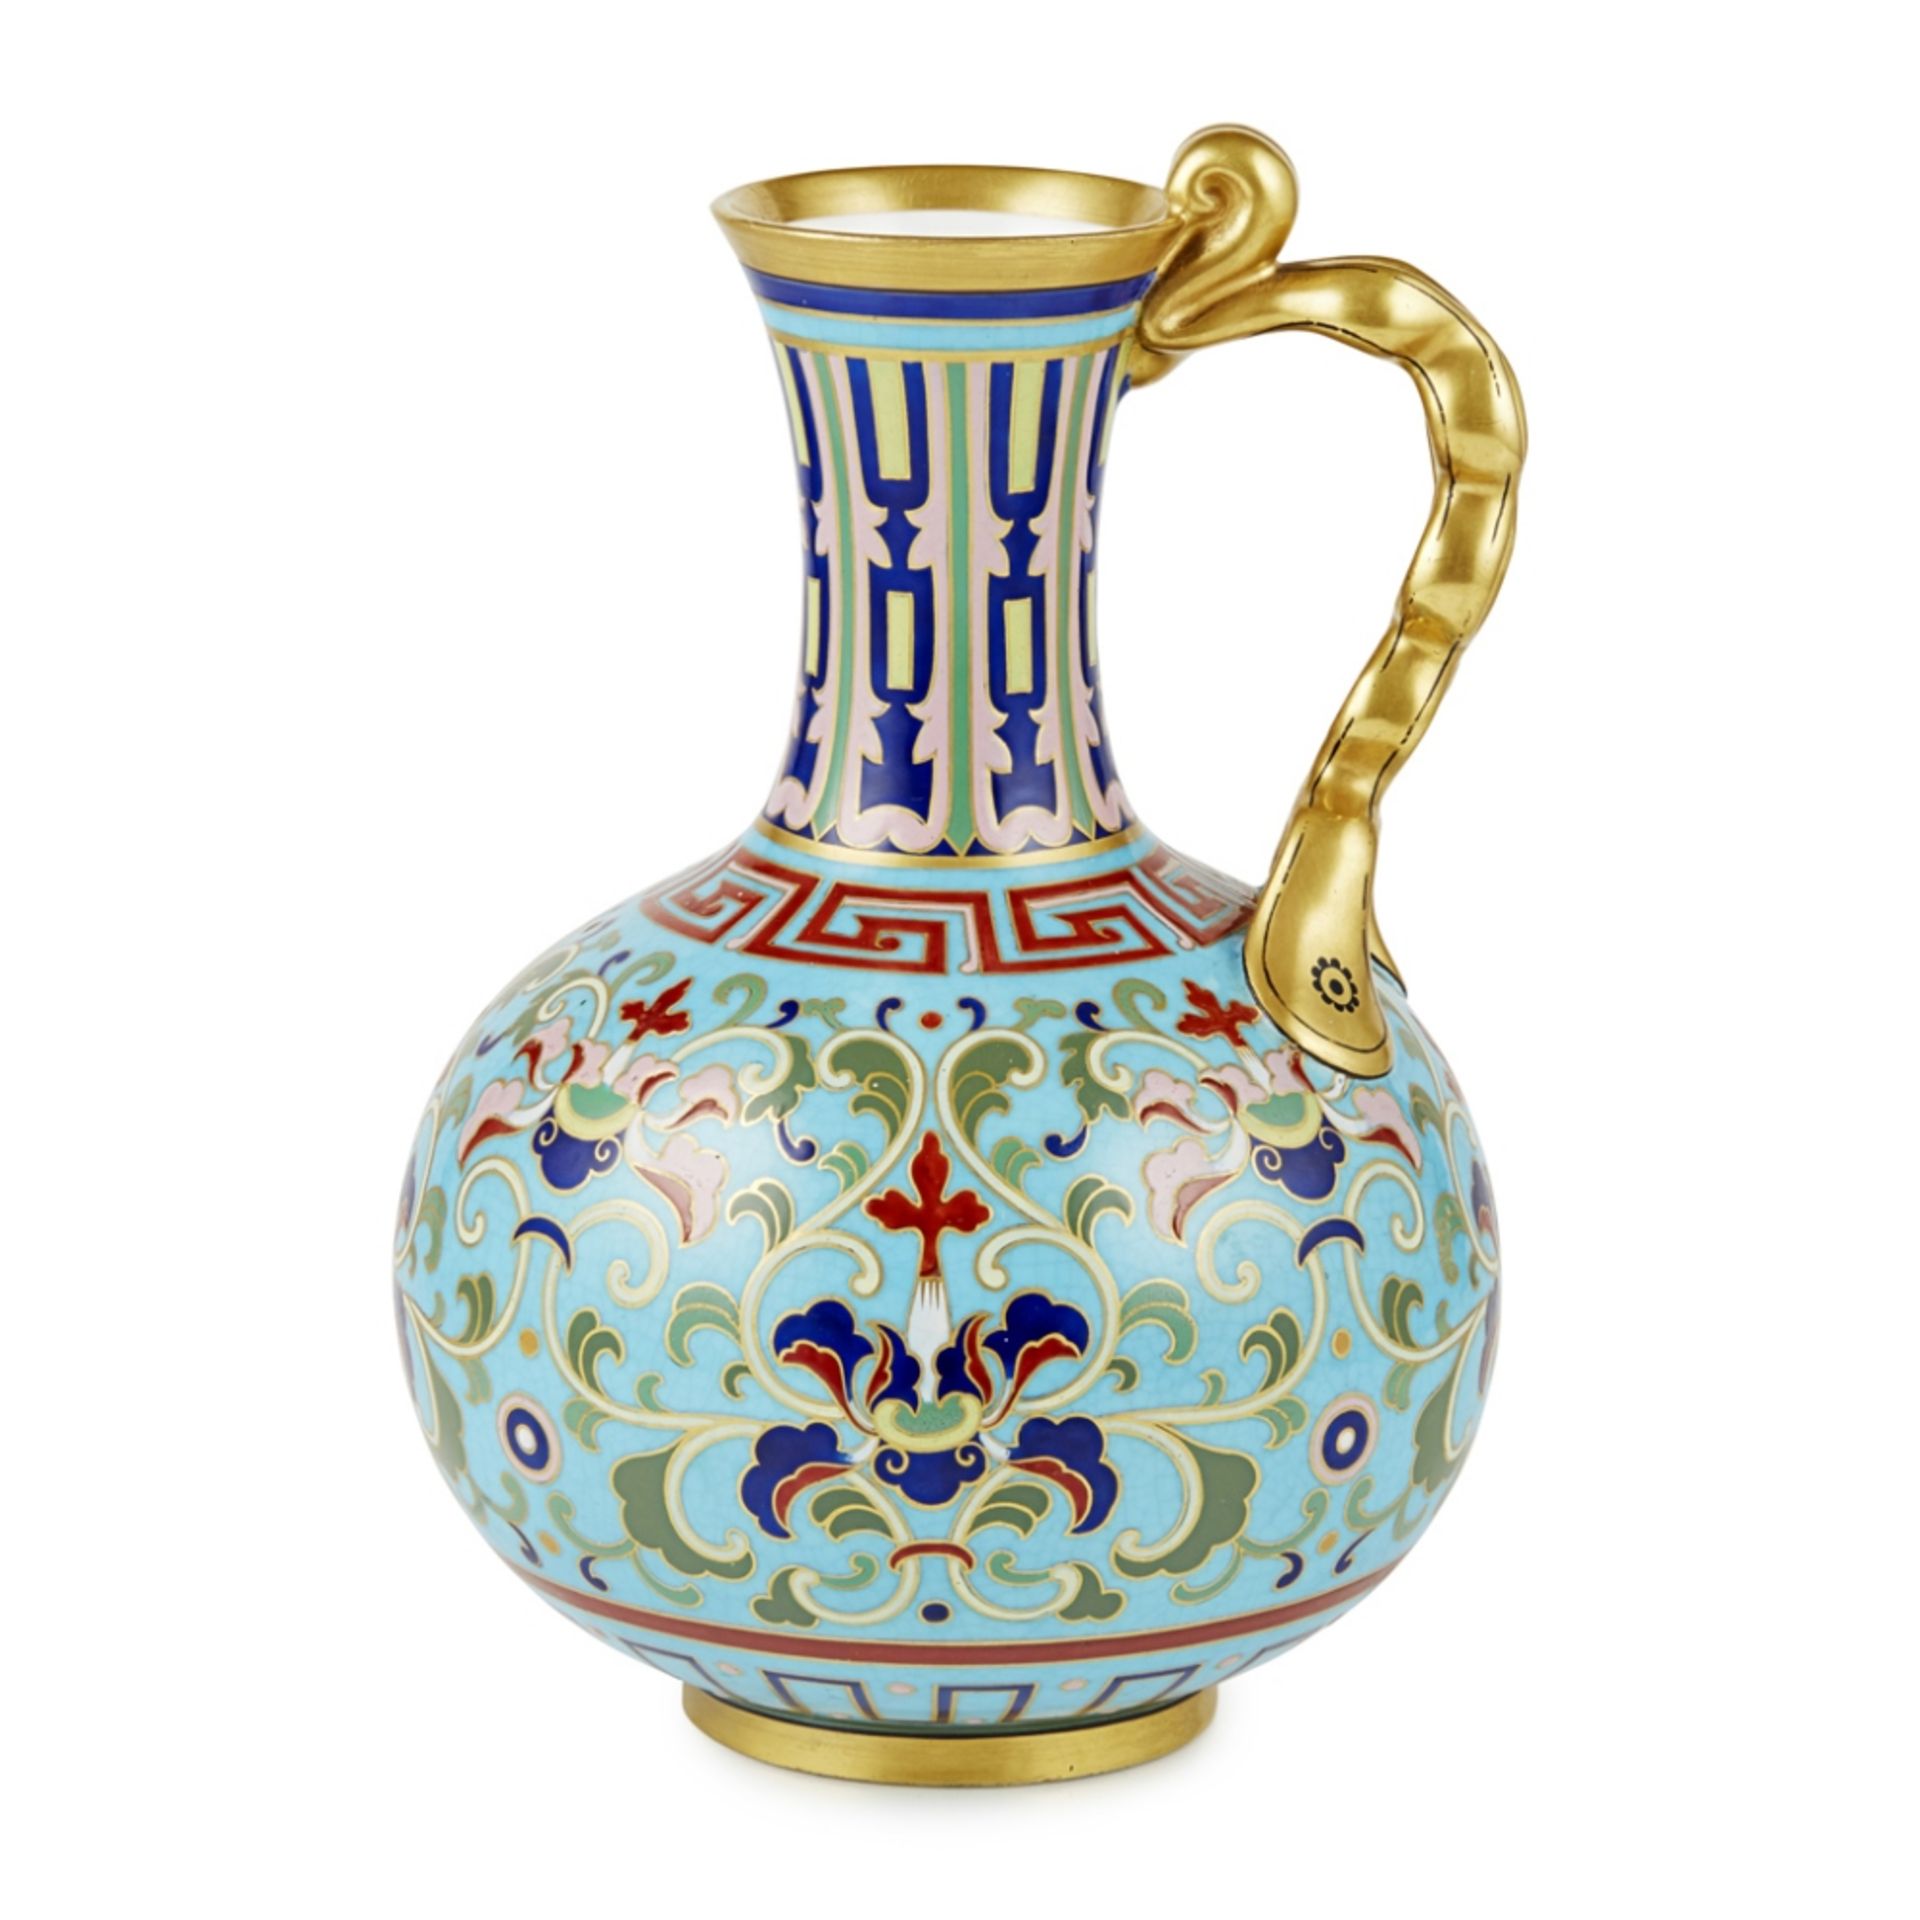 ATTRIBUTED TO CHRISTOPHER DRESSER FOR MINTON & CO. 'CLOISONNÉ' PORCELAIN EWER, CIRCA 1870 with